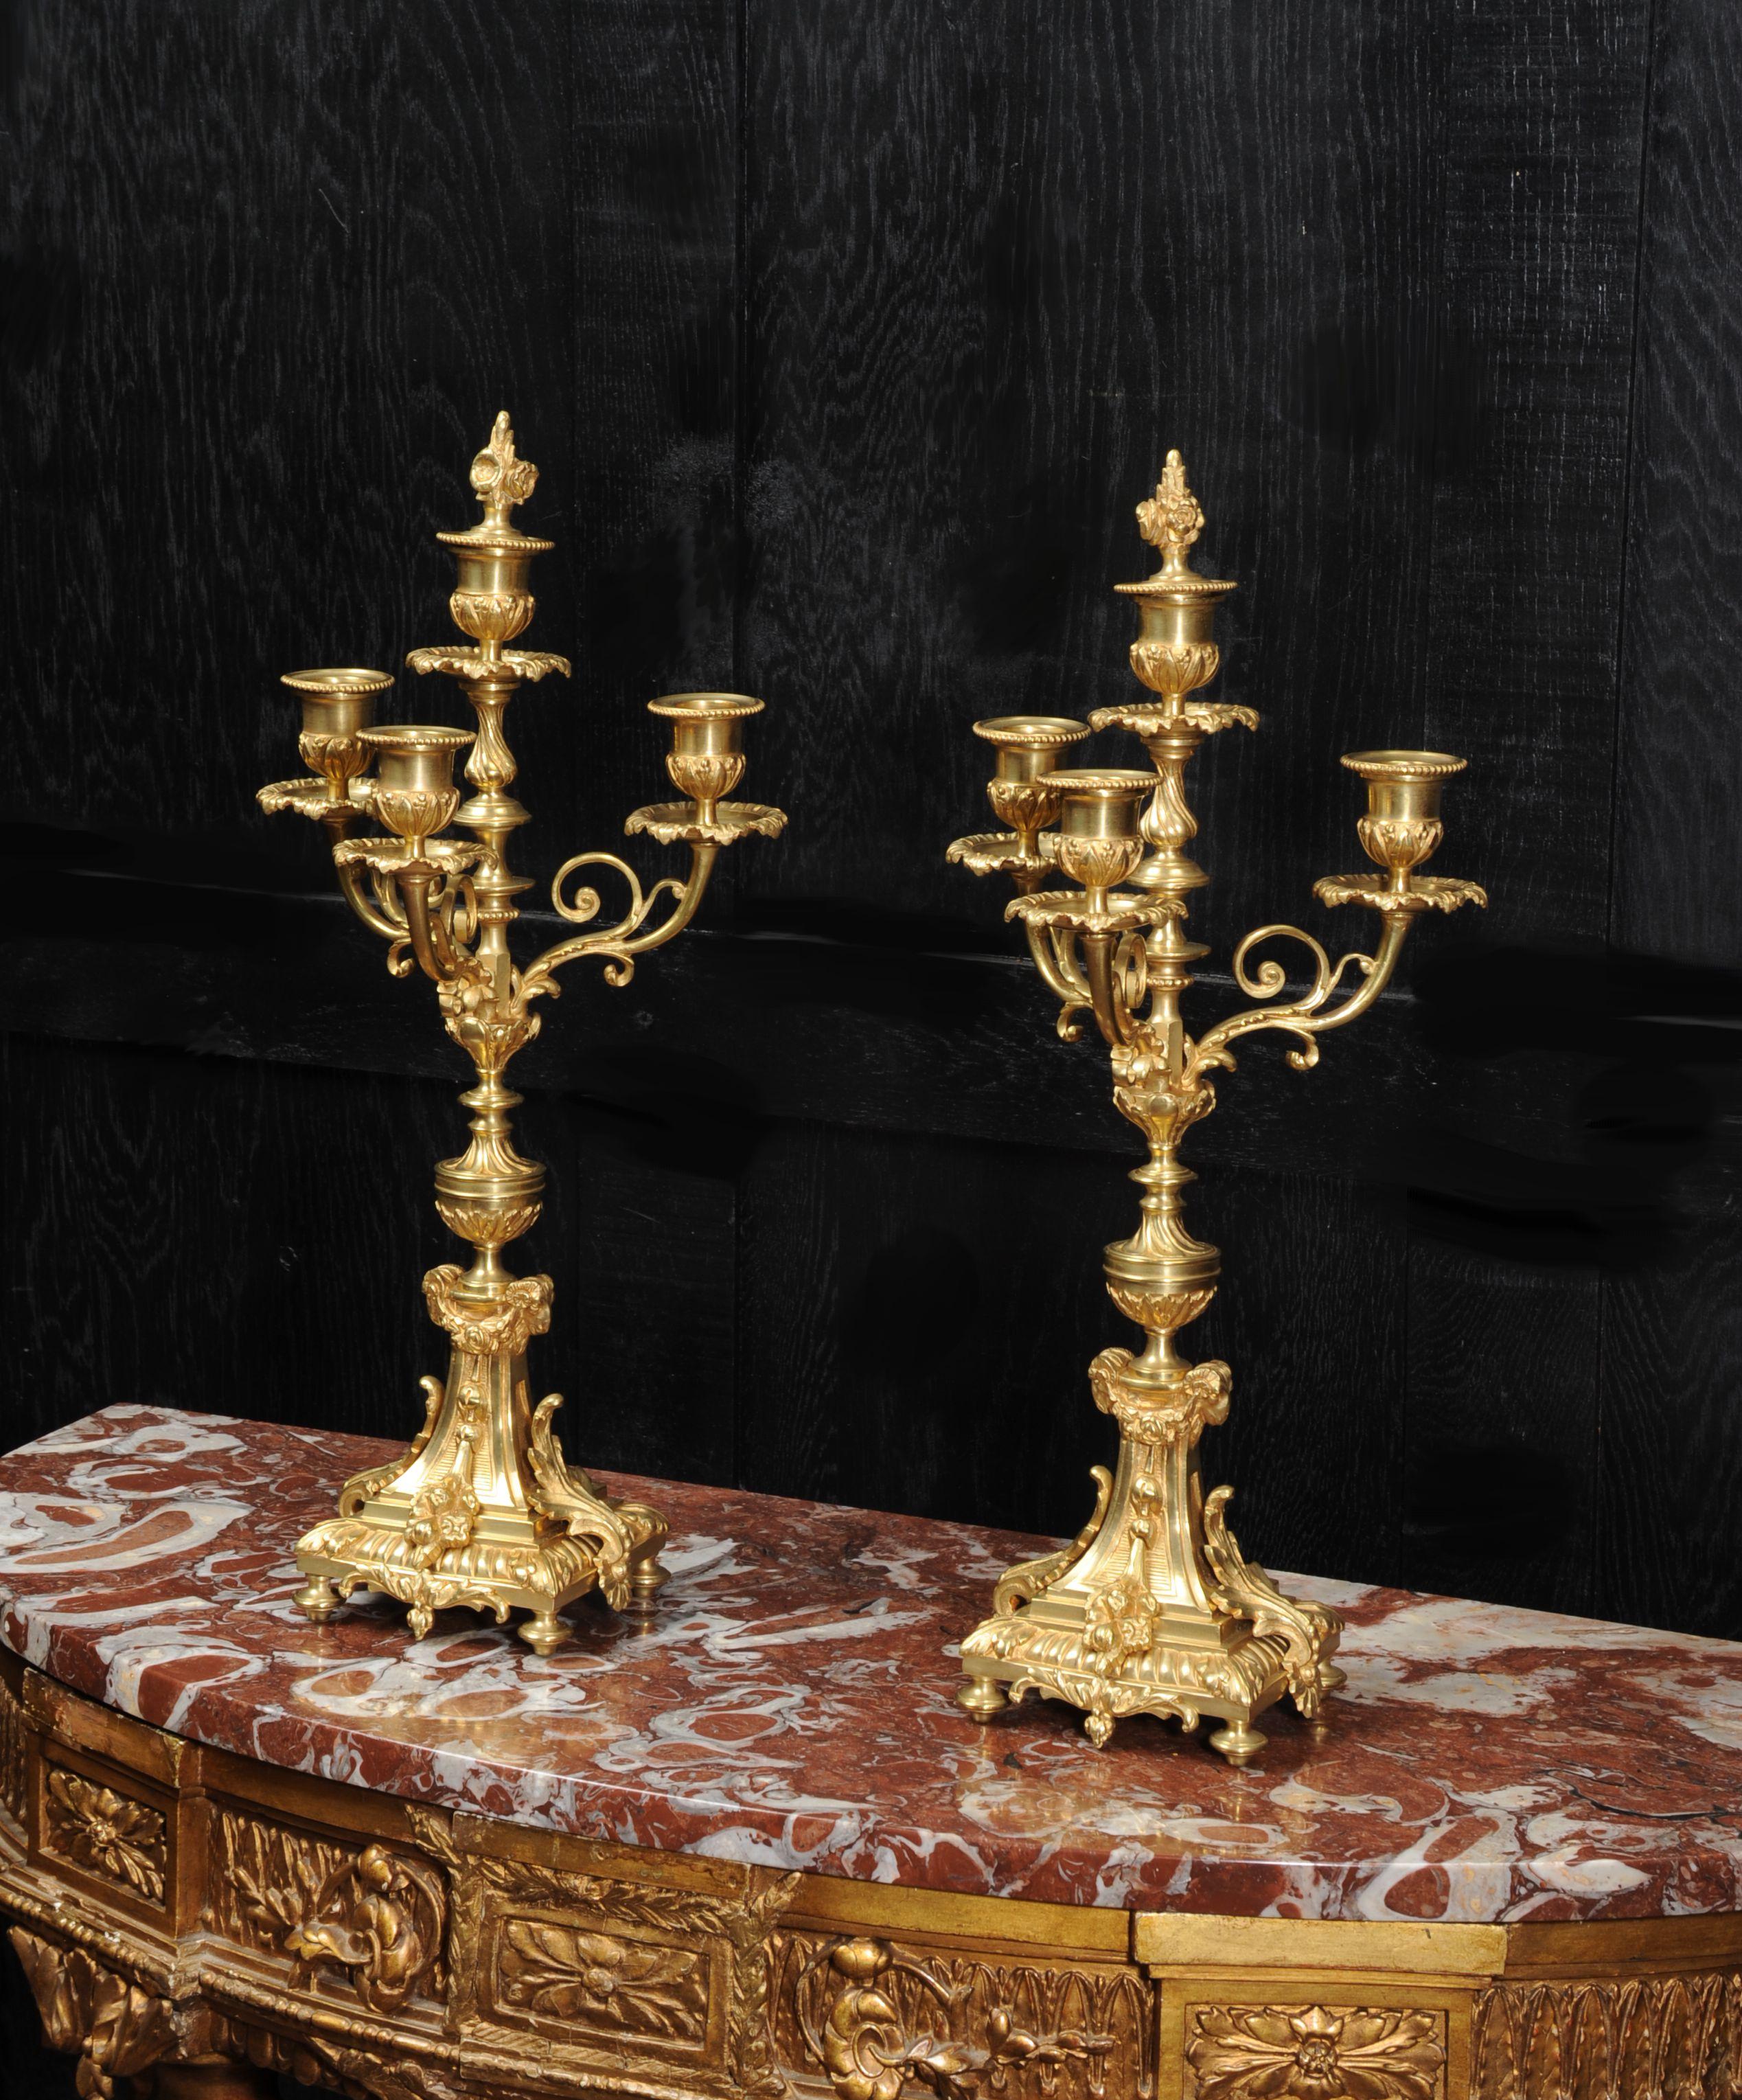 A superb pair of gilt bronze candelabra. They are French and date from circa 1880. Candelabra have three delicate acanthus arms and are complete with original snuffers that are stored in the central nozzle.

Dimensions of candelabra (with snuffers